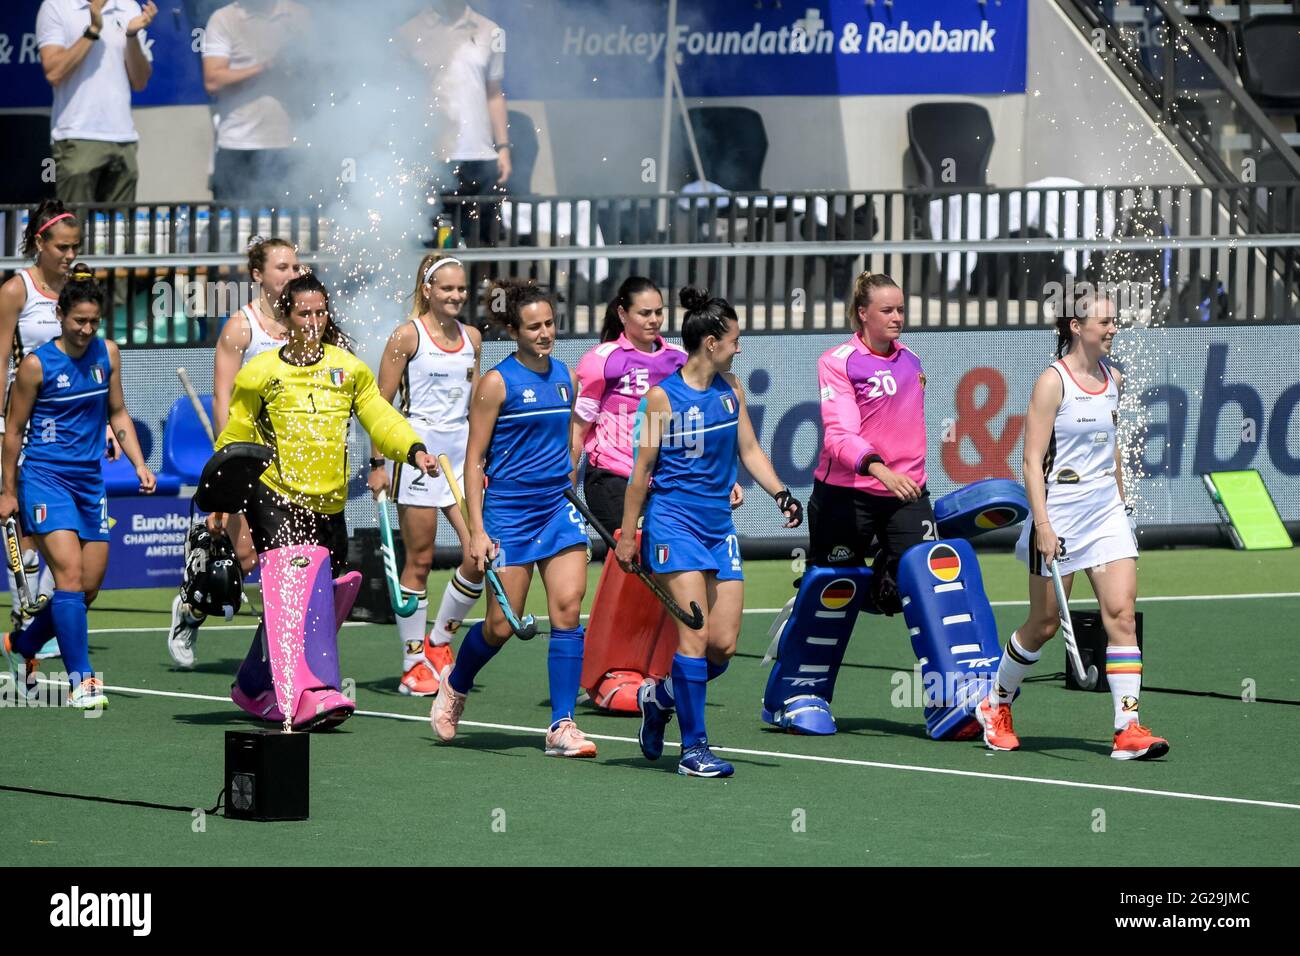 AMSTELVEEN, NETHERLANDS - JUNE 9: Chiara Tiddi of Italy, goalkeeper Julia Sonntag of Germany and Amelie Wortmann of Germany during the Euro Hockey Championships match between Germany and Italy at Wagener Stadion on June 9, 2021 in Amstelveen, Netherlands (Photo by Gerrit van Keulen/Orange Pictures) Stock Photo